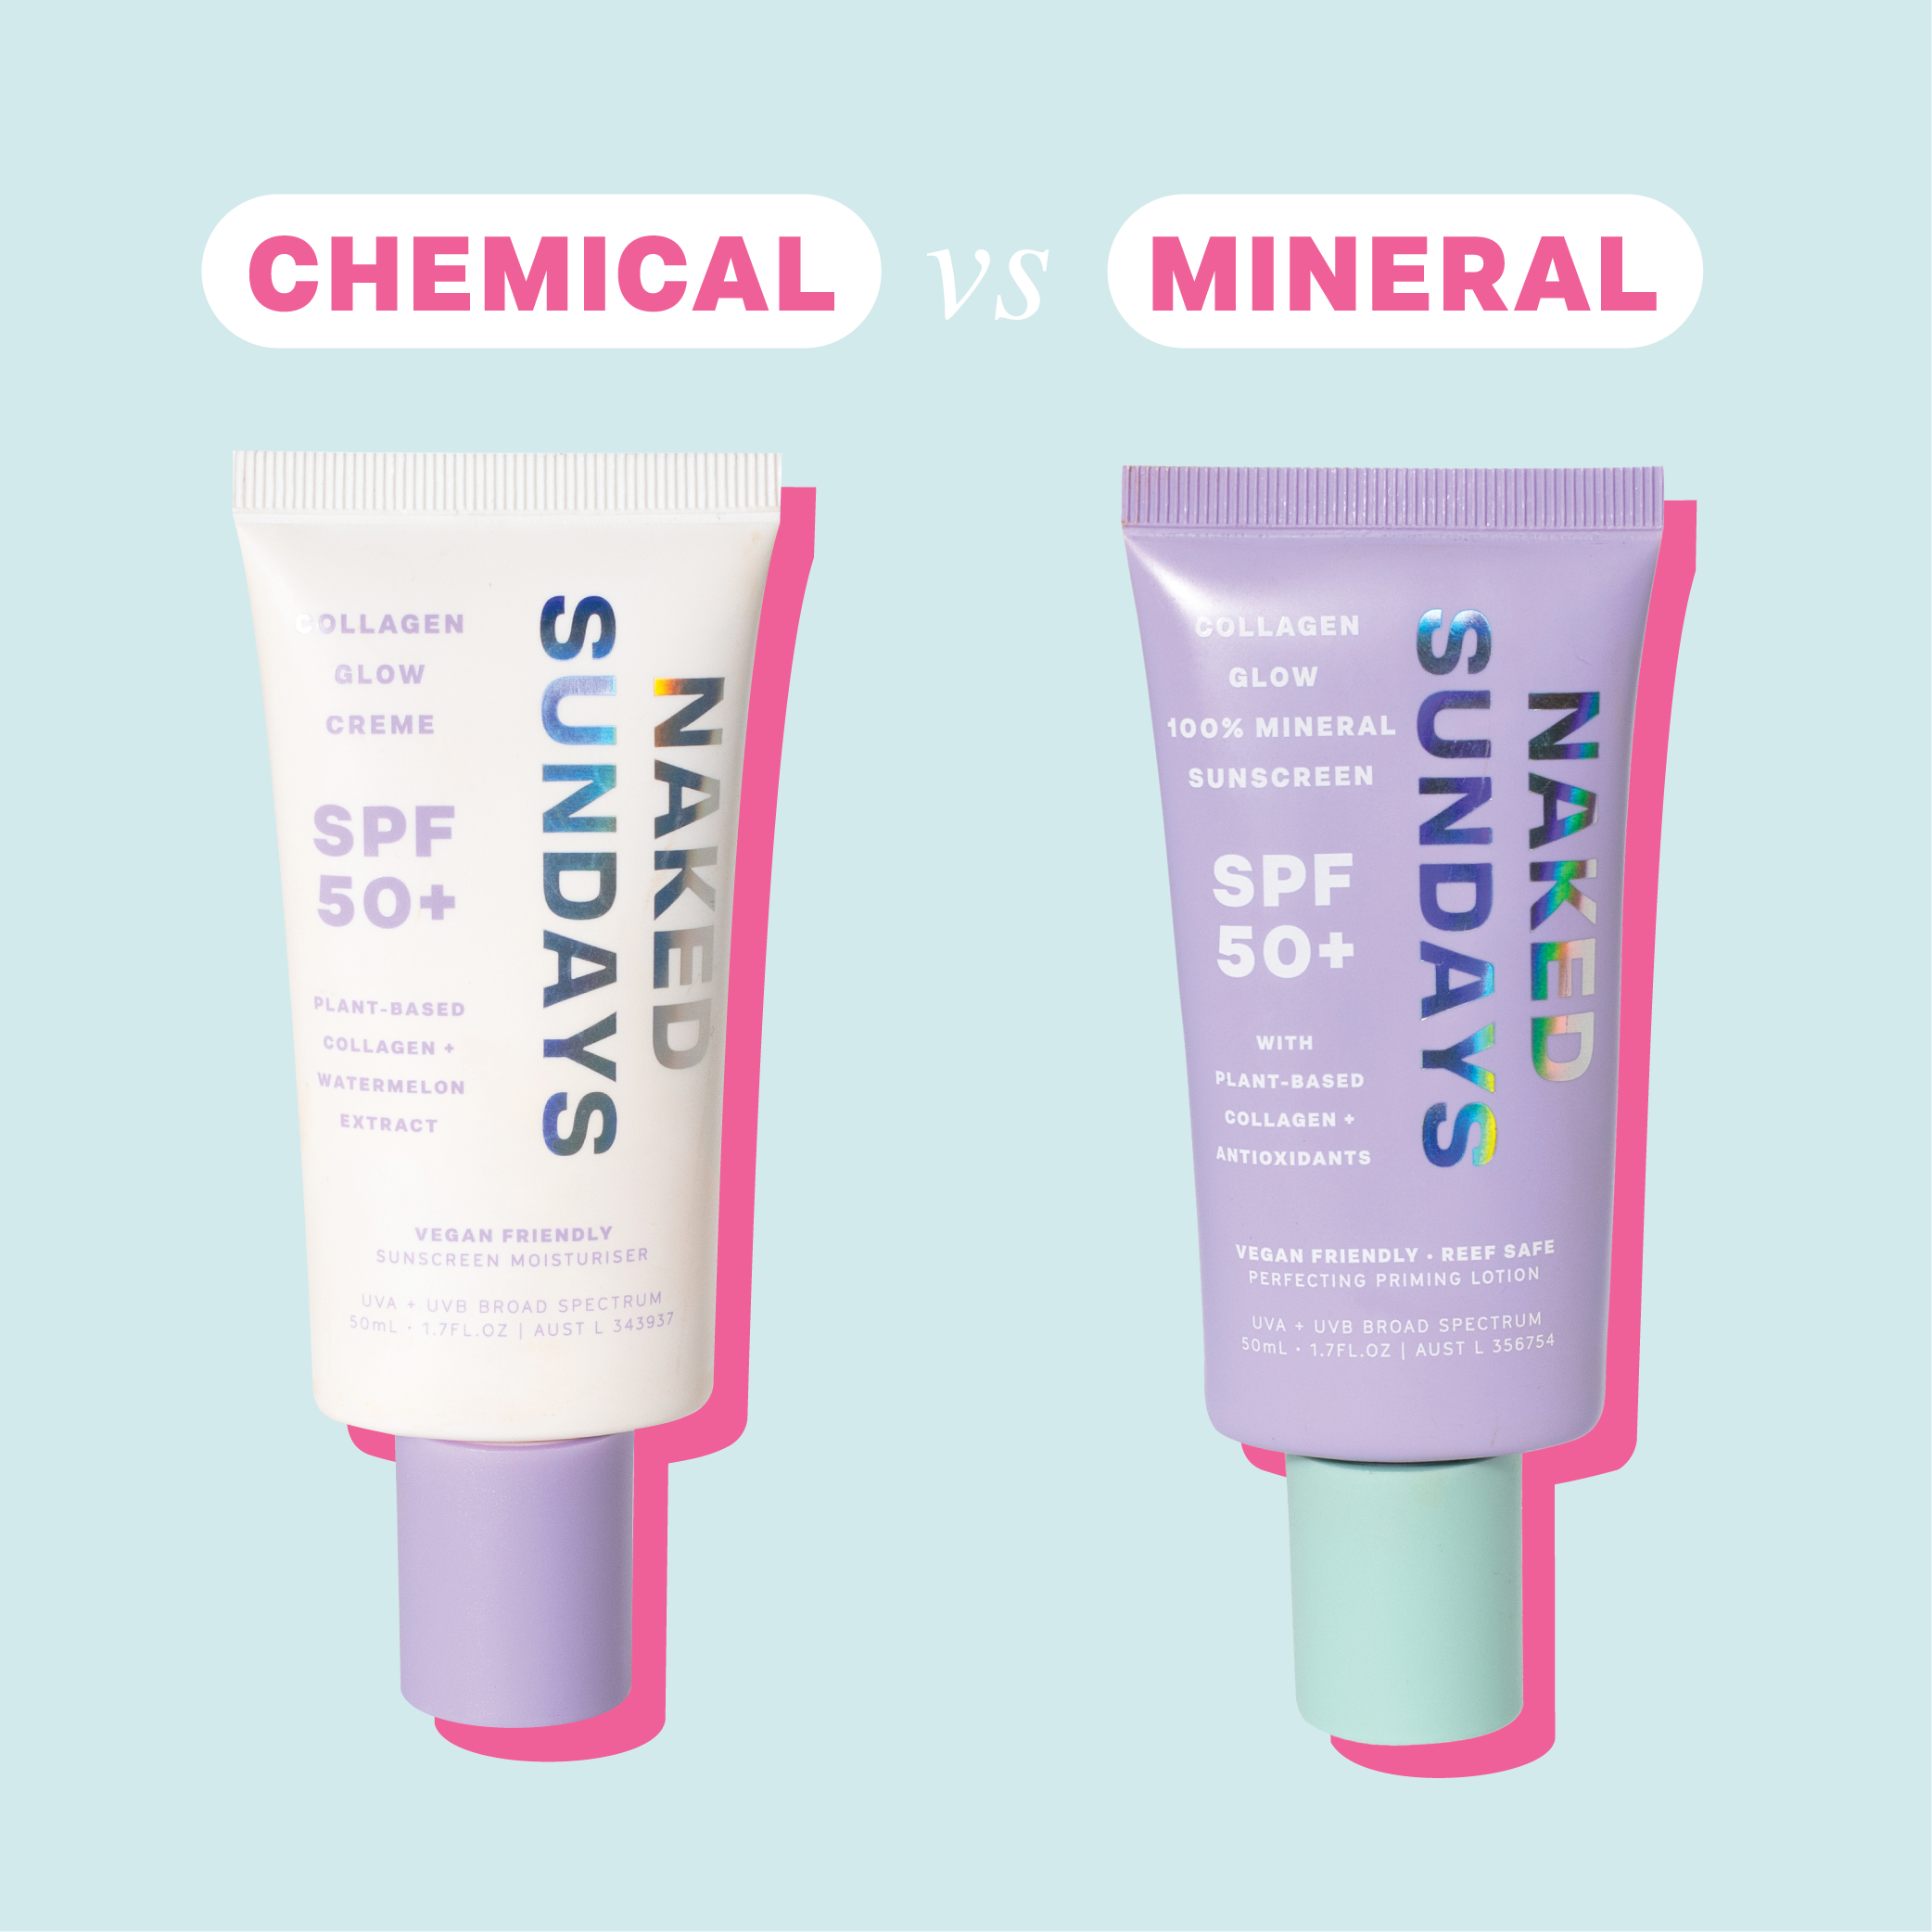 MINERAL vs CHEMICAL: Which one to choose!